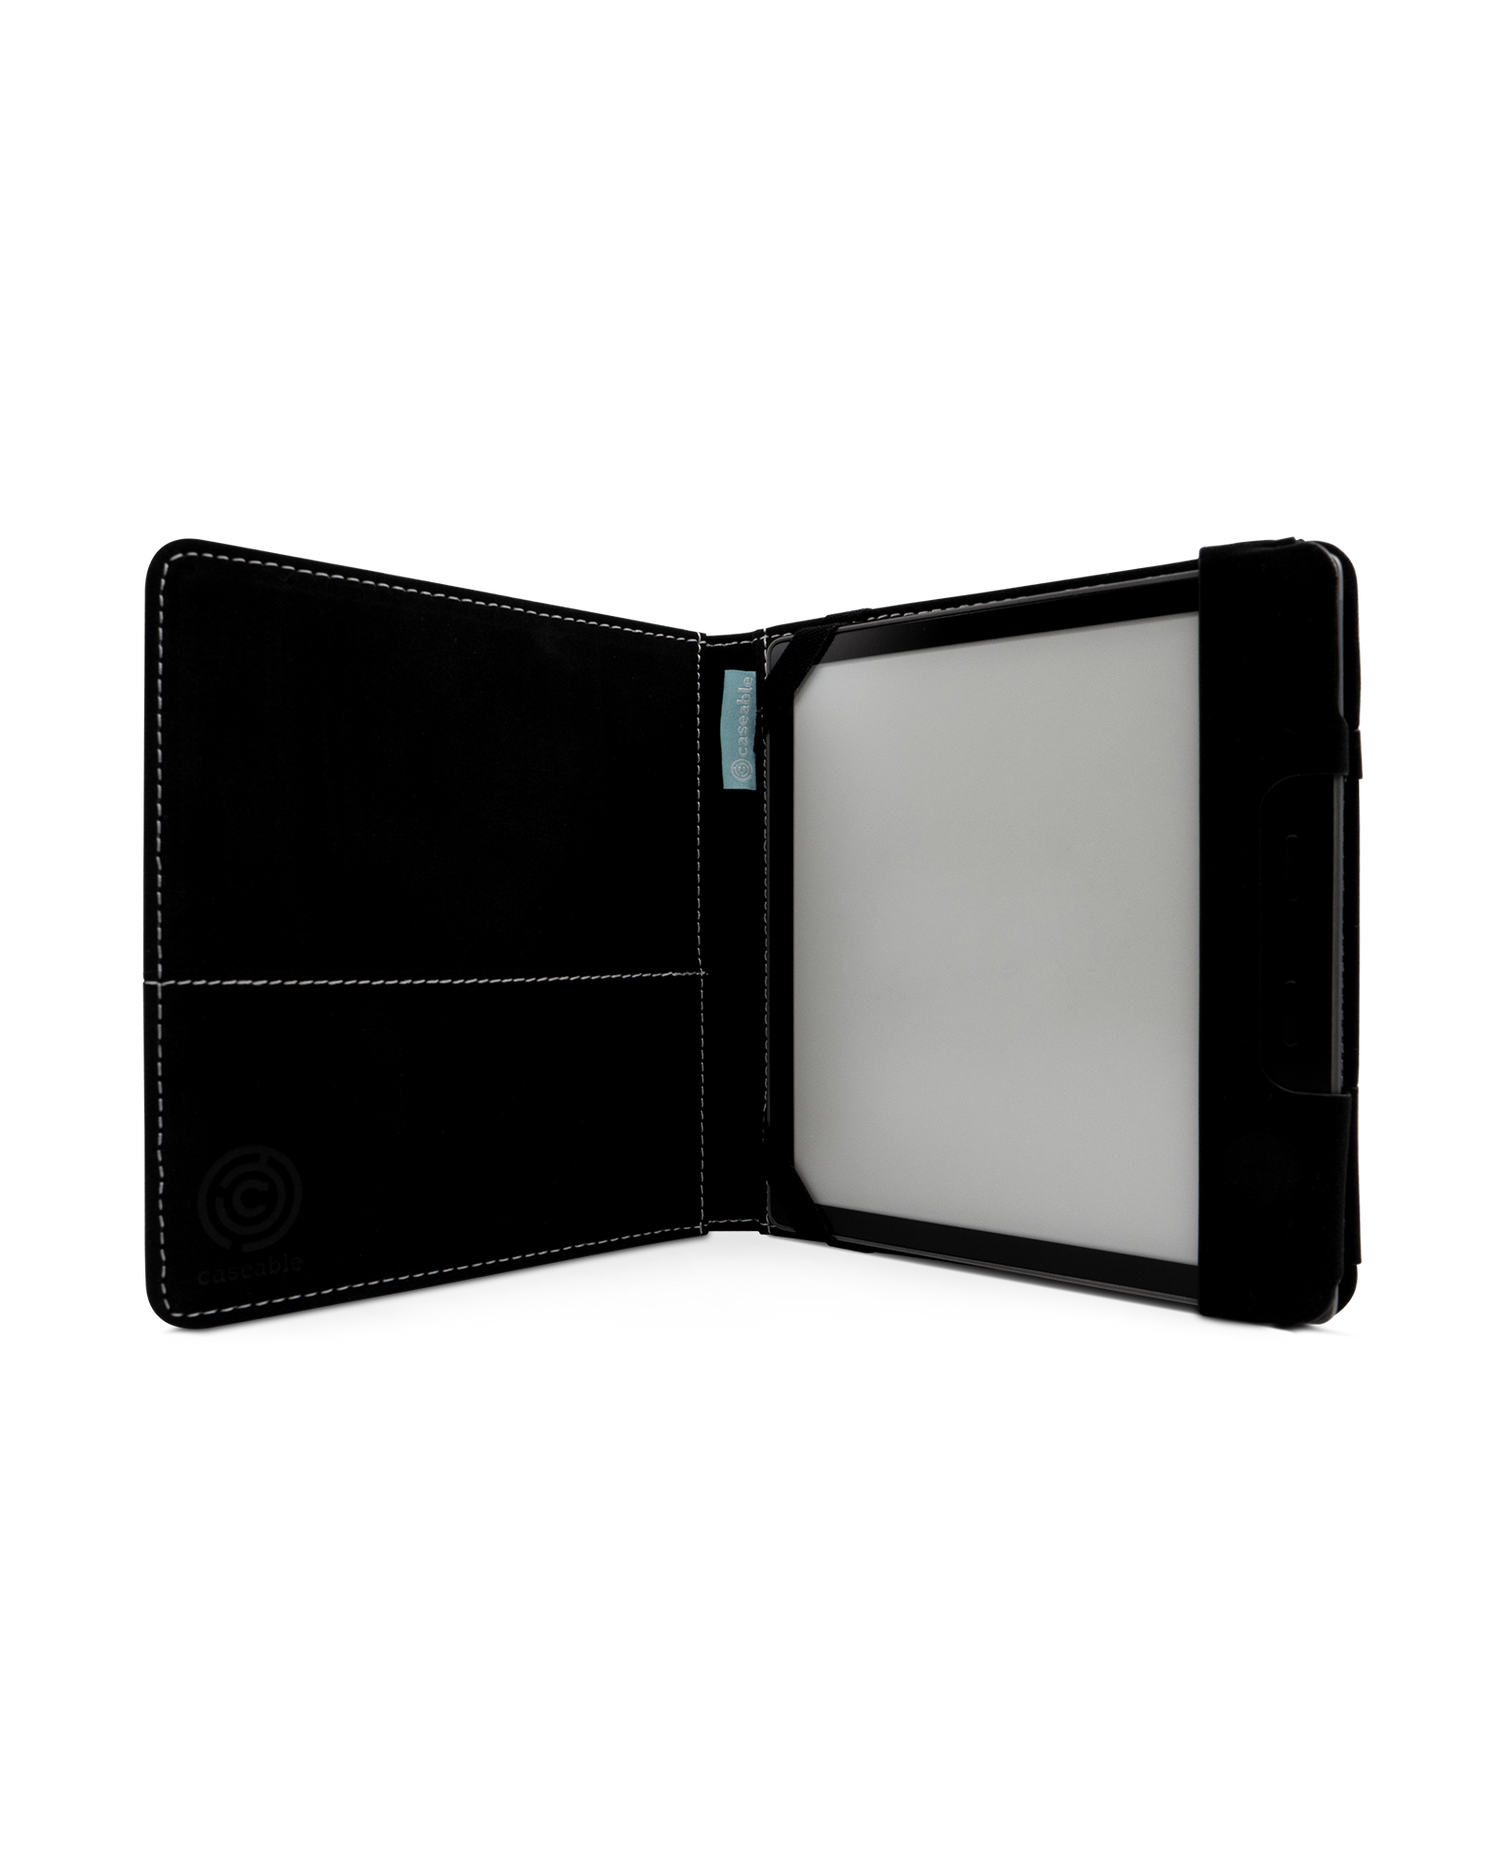 Drink Coffee eReader Case for tolino vision 6: Opened interior view